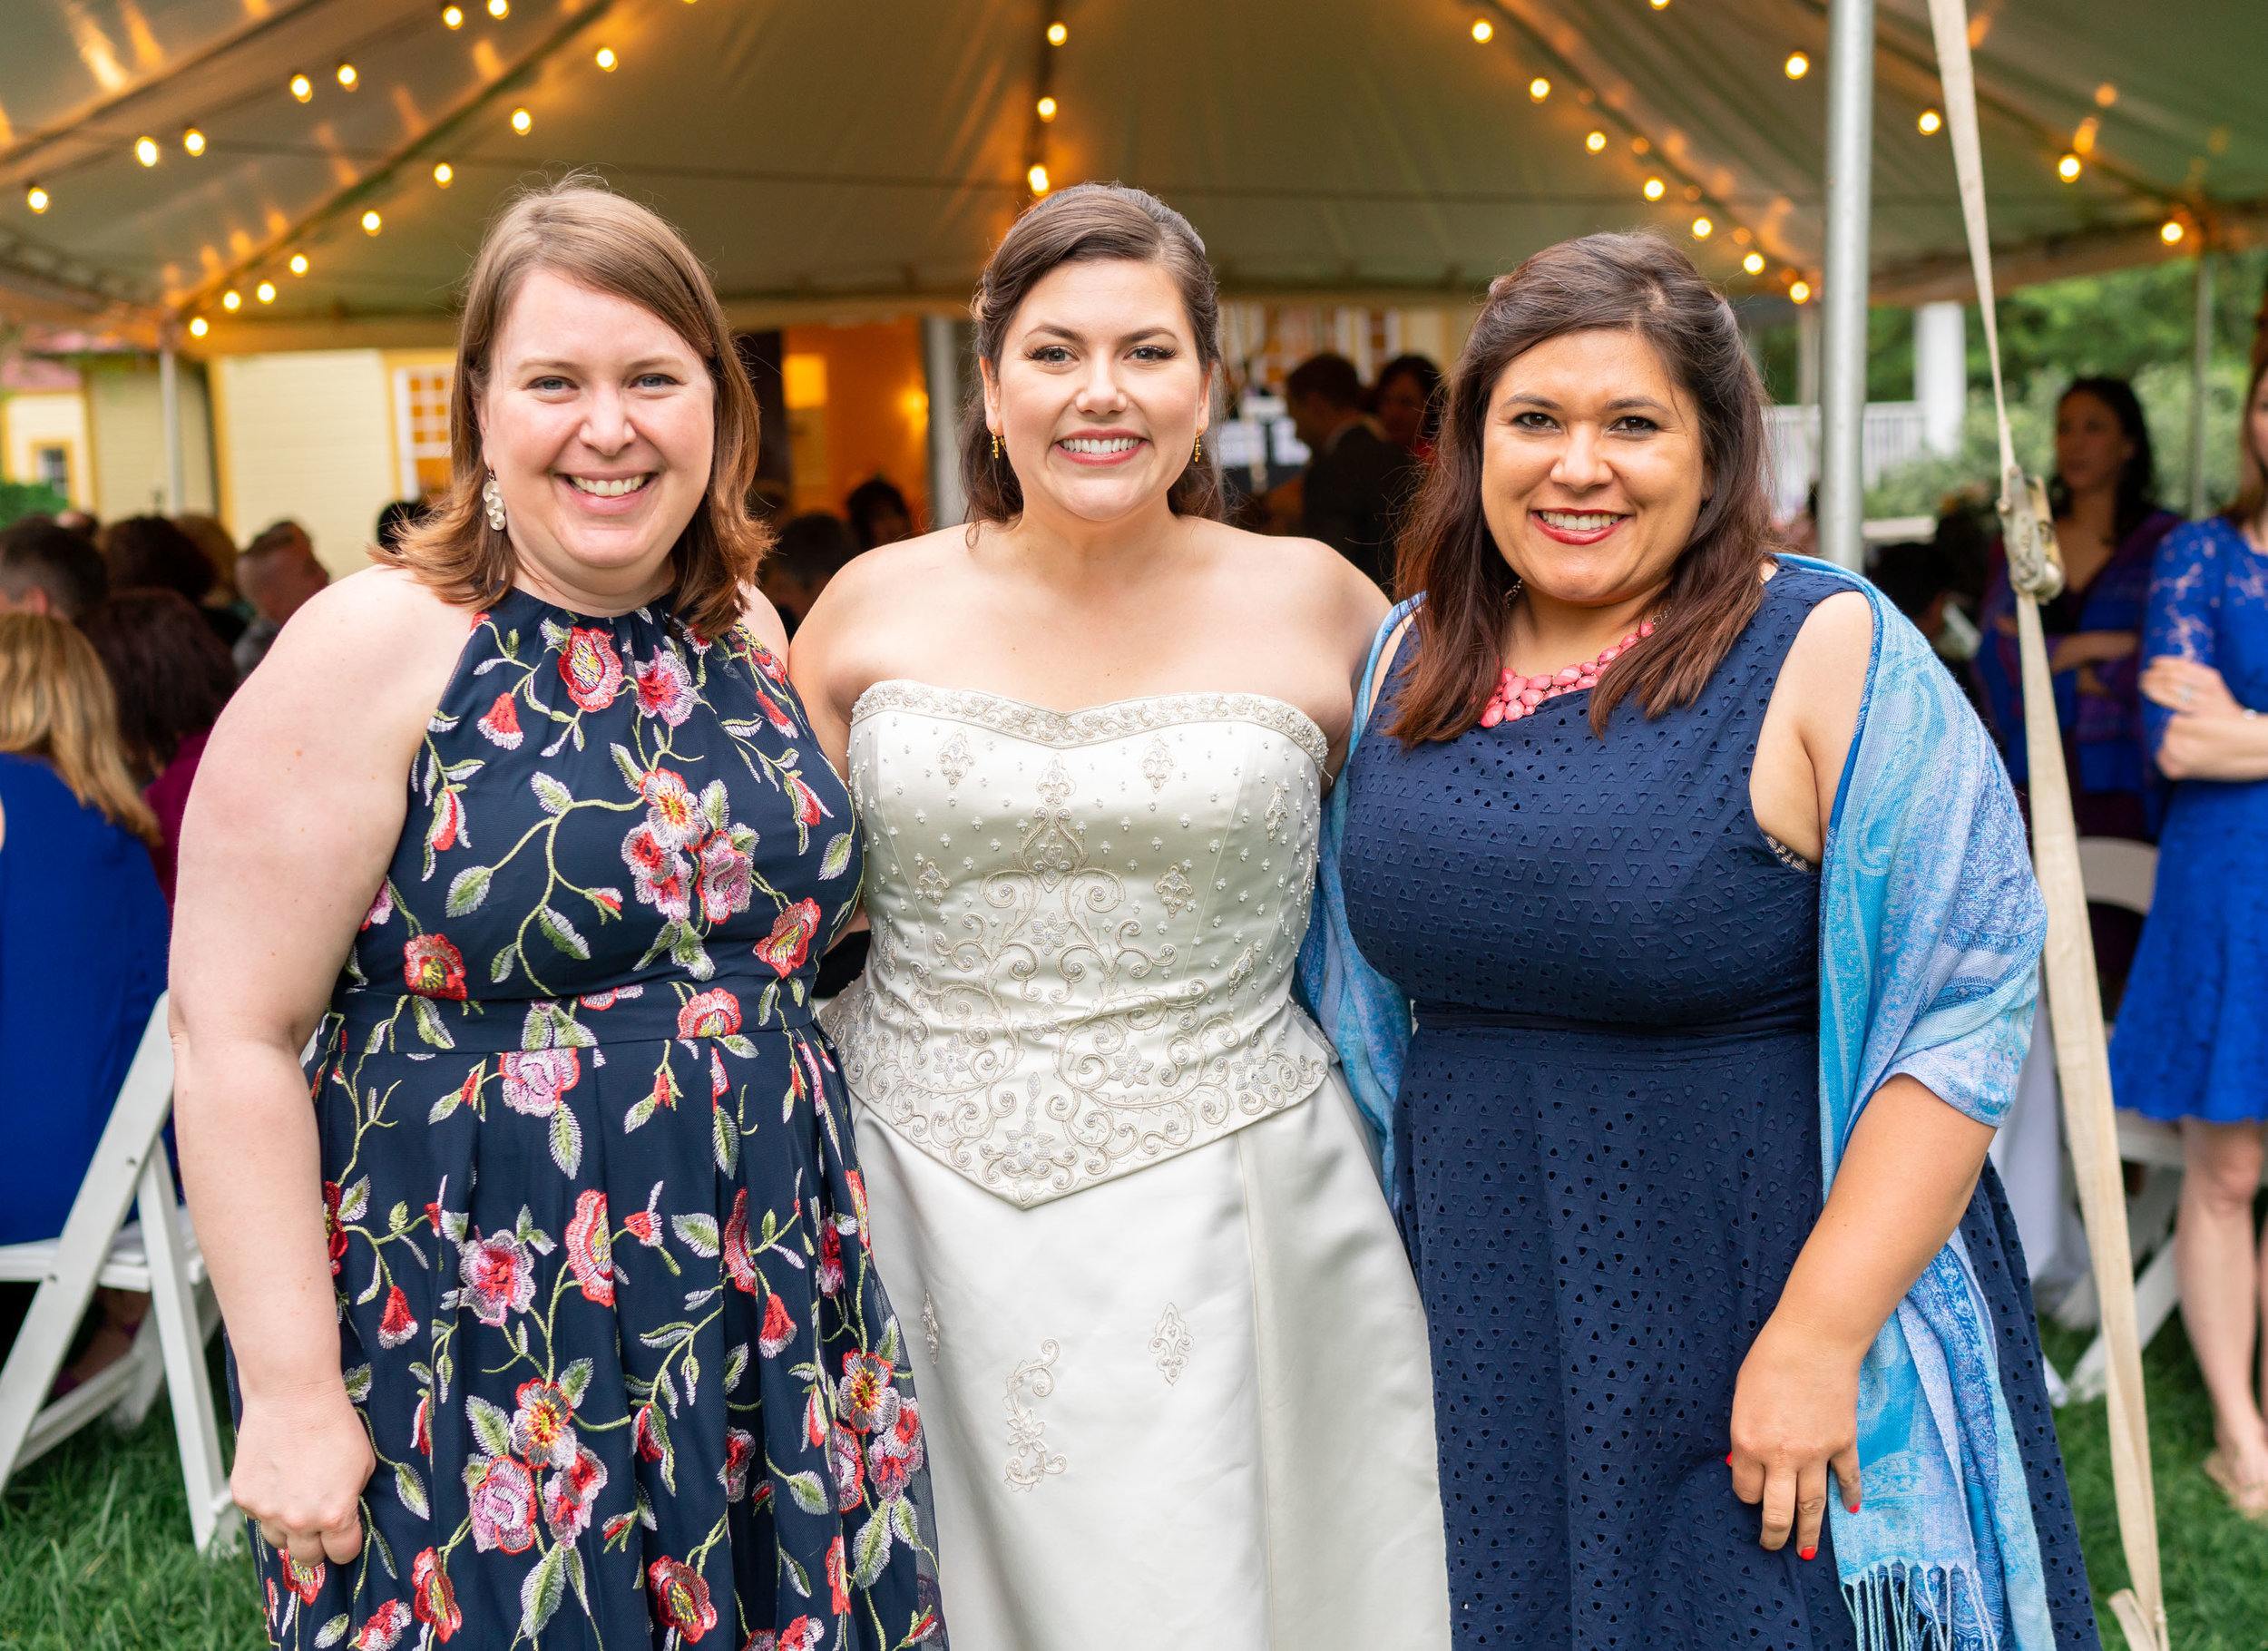 Bride and her friends under tent reception at Hendry House wedding